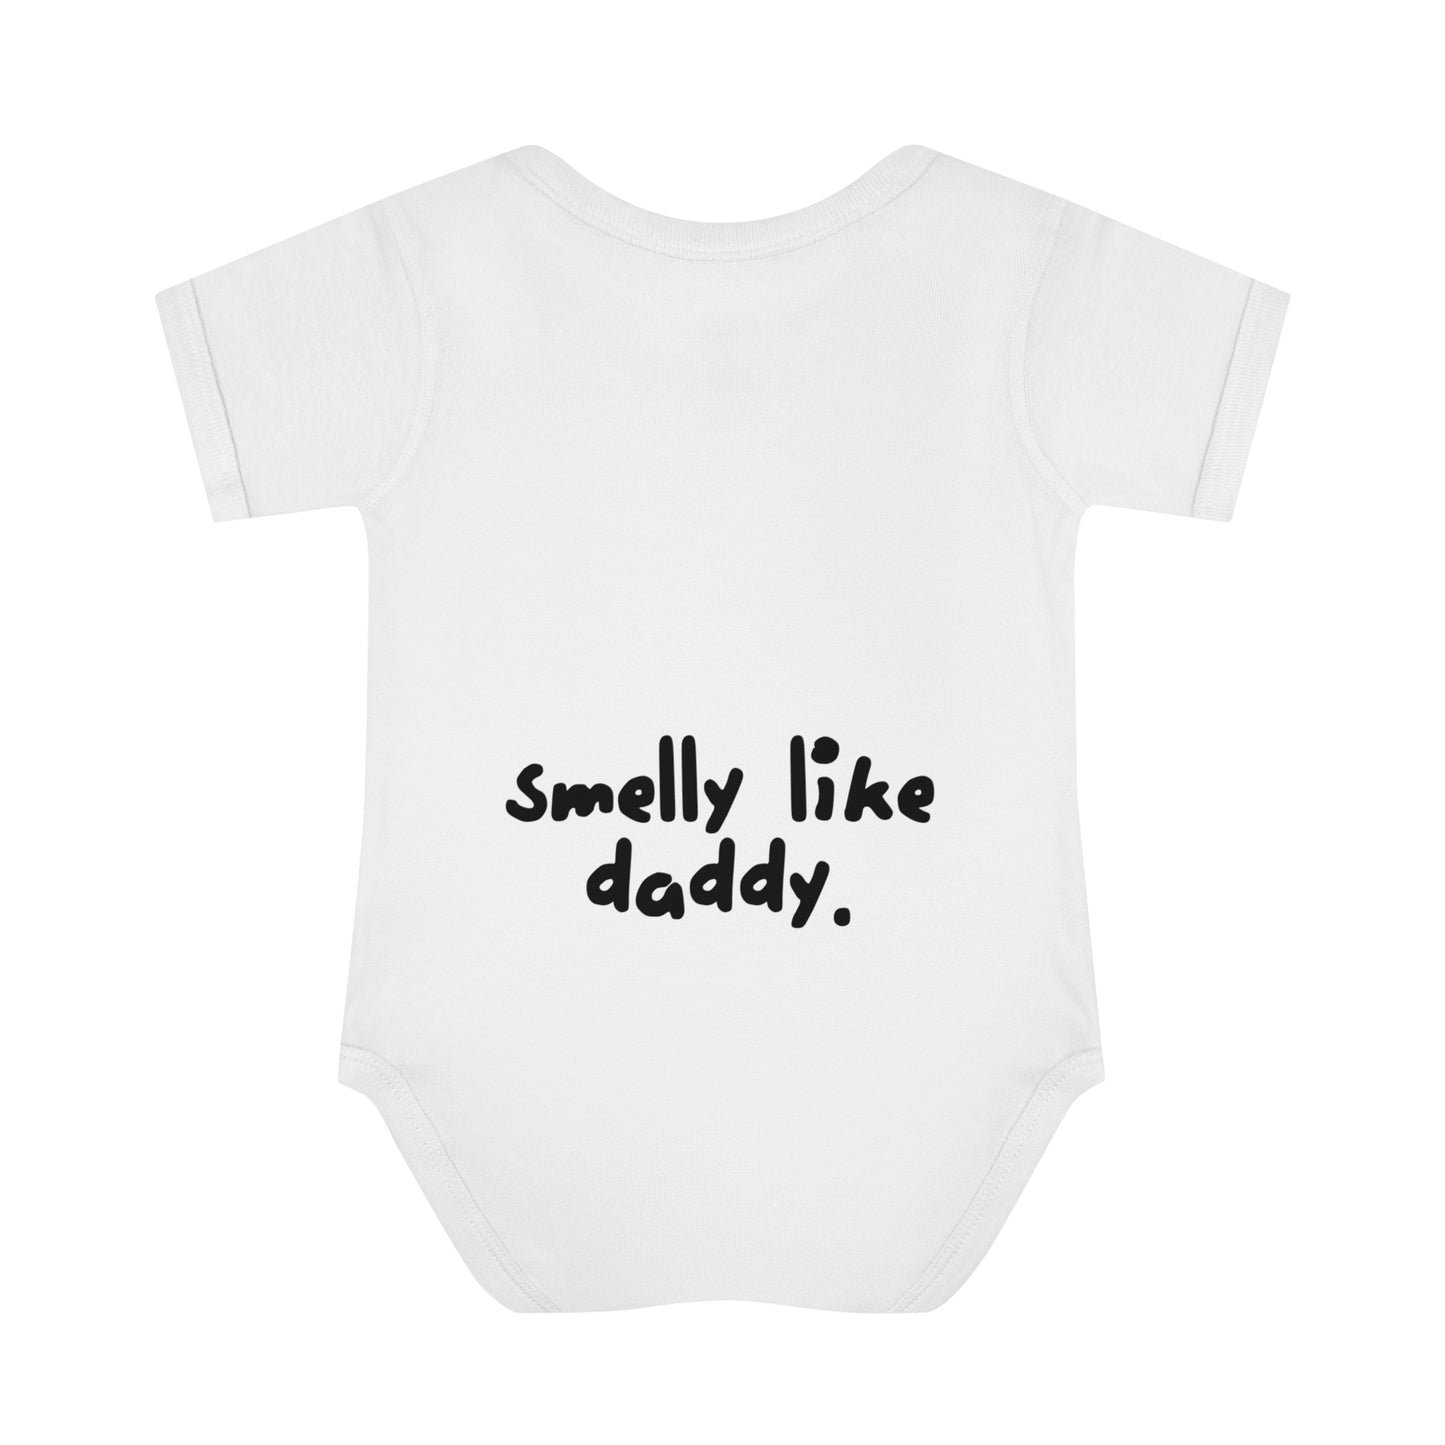 Cute Like Mommy, Smelly Like Daddy, Infant Bodysuit, Funny Fart Humor, Baby t-shirt, Snap One Piece, Playful, Hilarious T-Shirt, Shower Gift